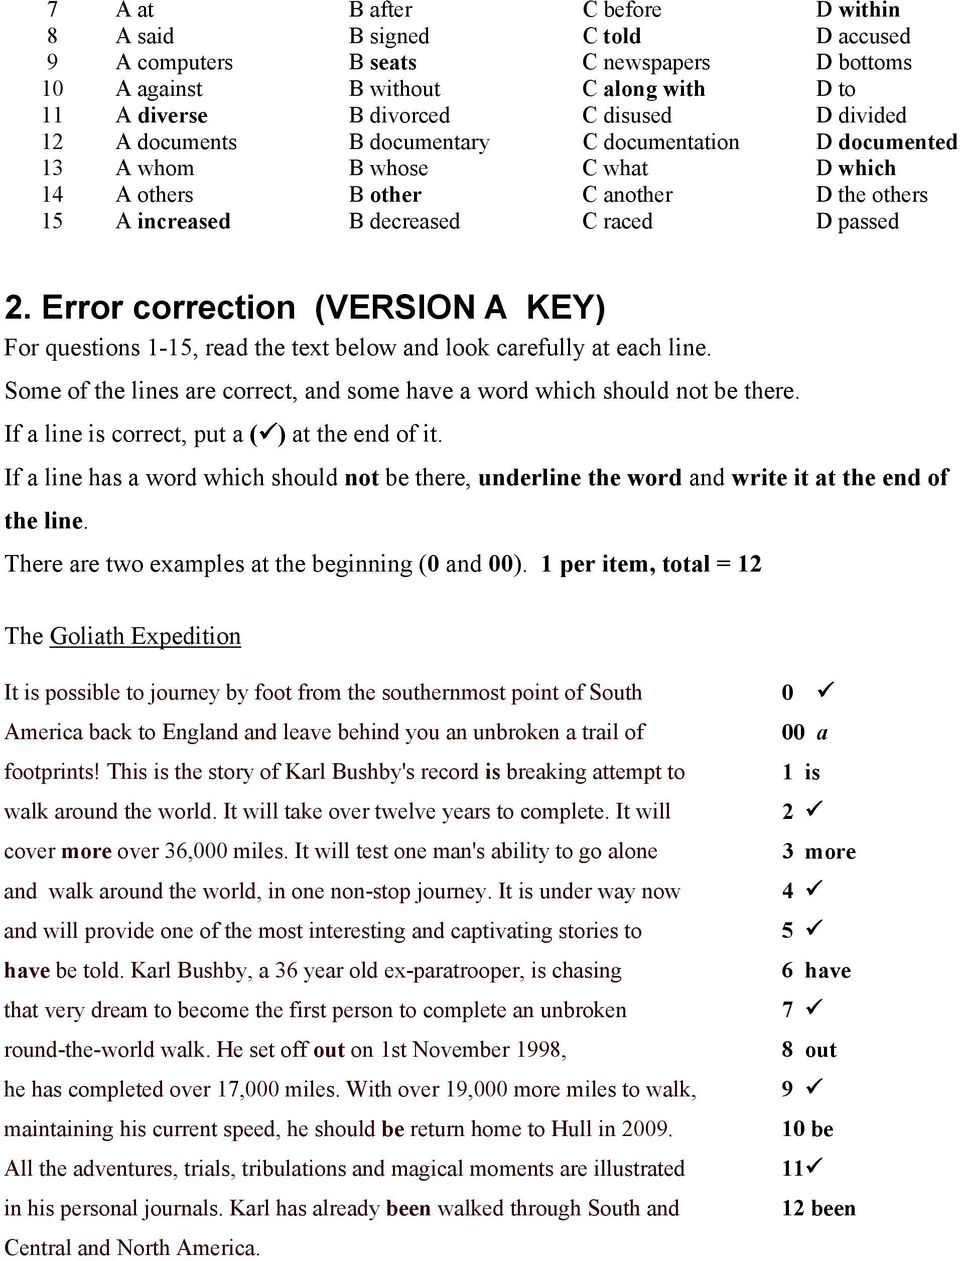 Error correction (VERSION A KEY) For questions 1-15, read the text below and look carefully at each line. Some of the lines are correct, and some have a word which should not be there.